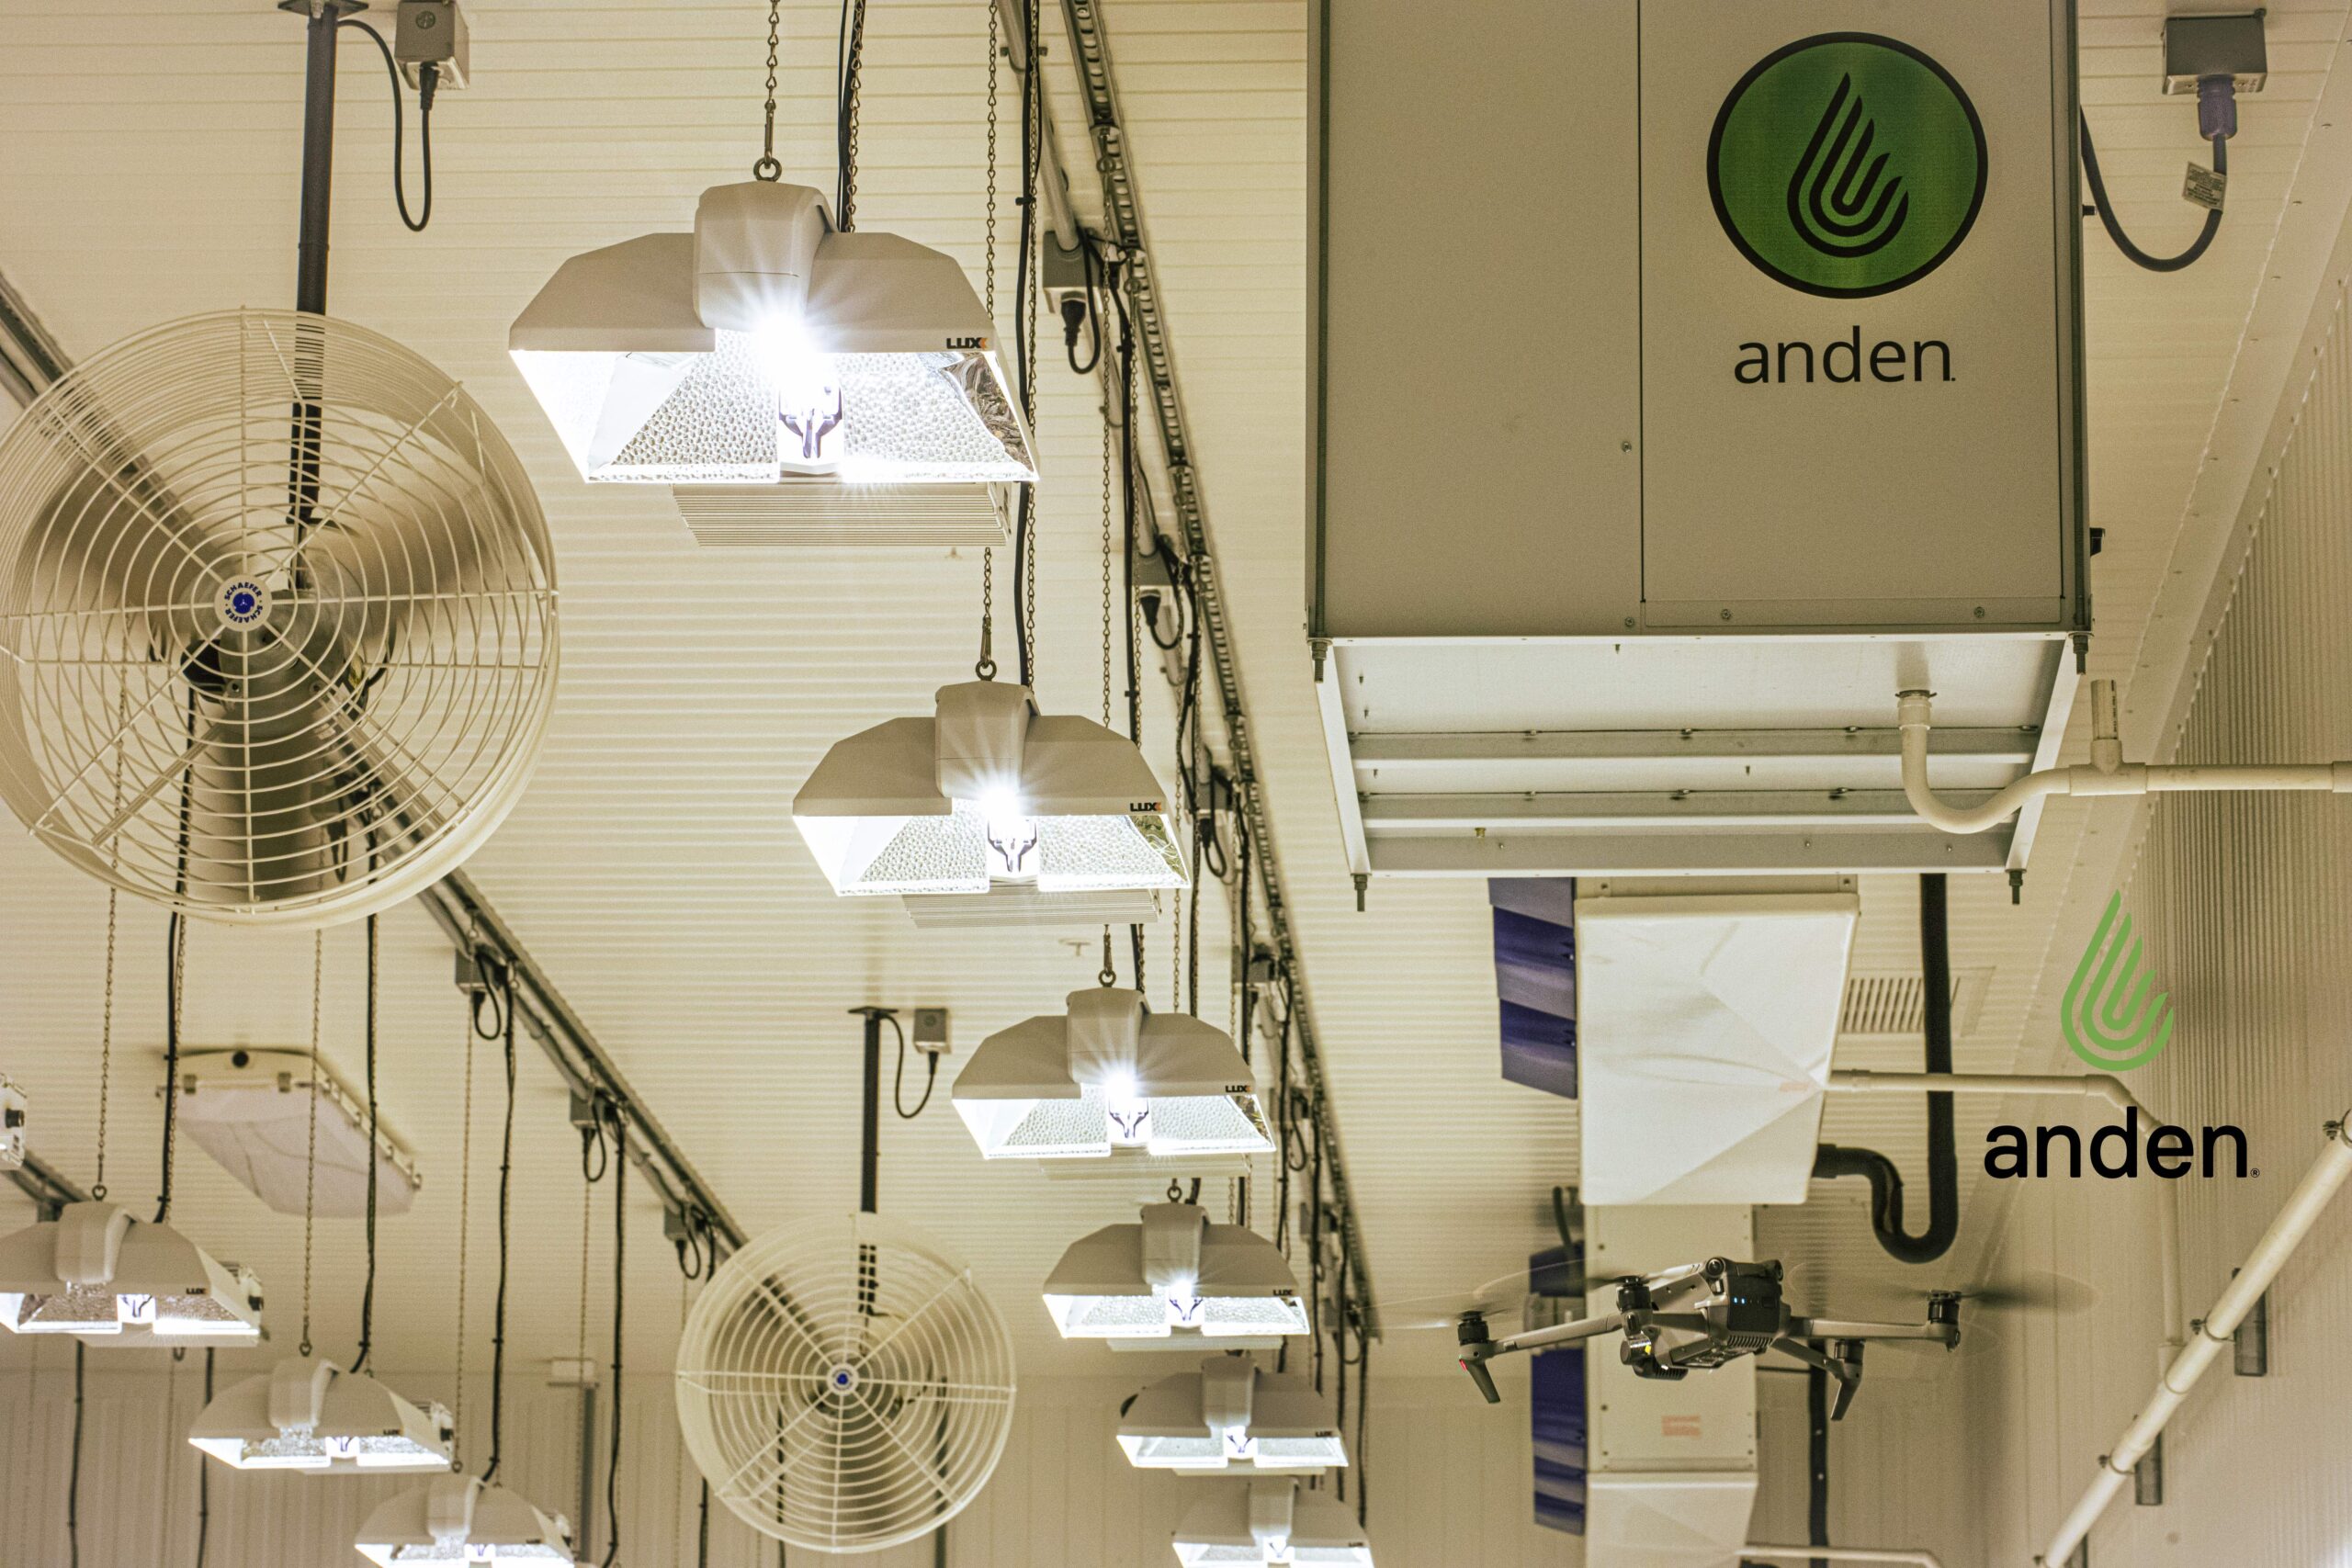 Pro Advice: Anden Humidity Control